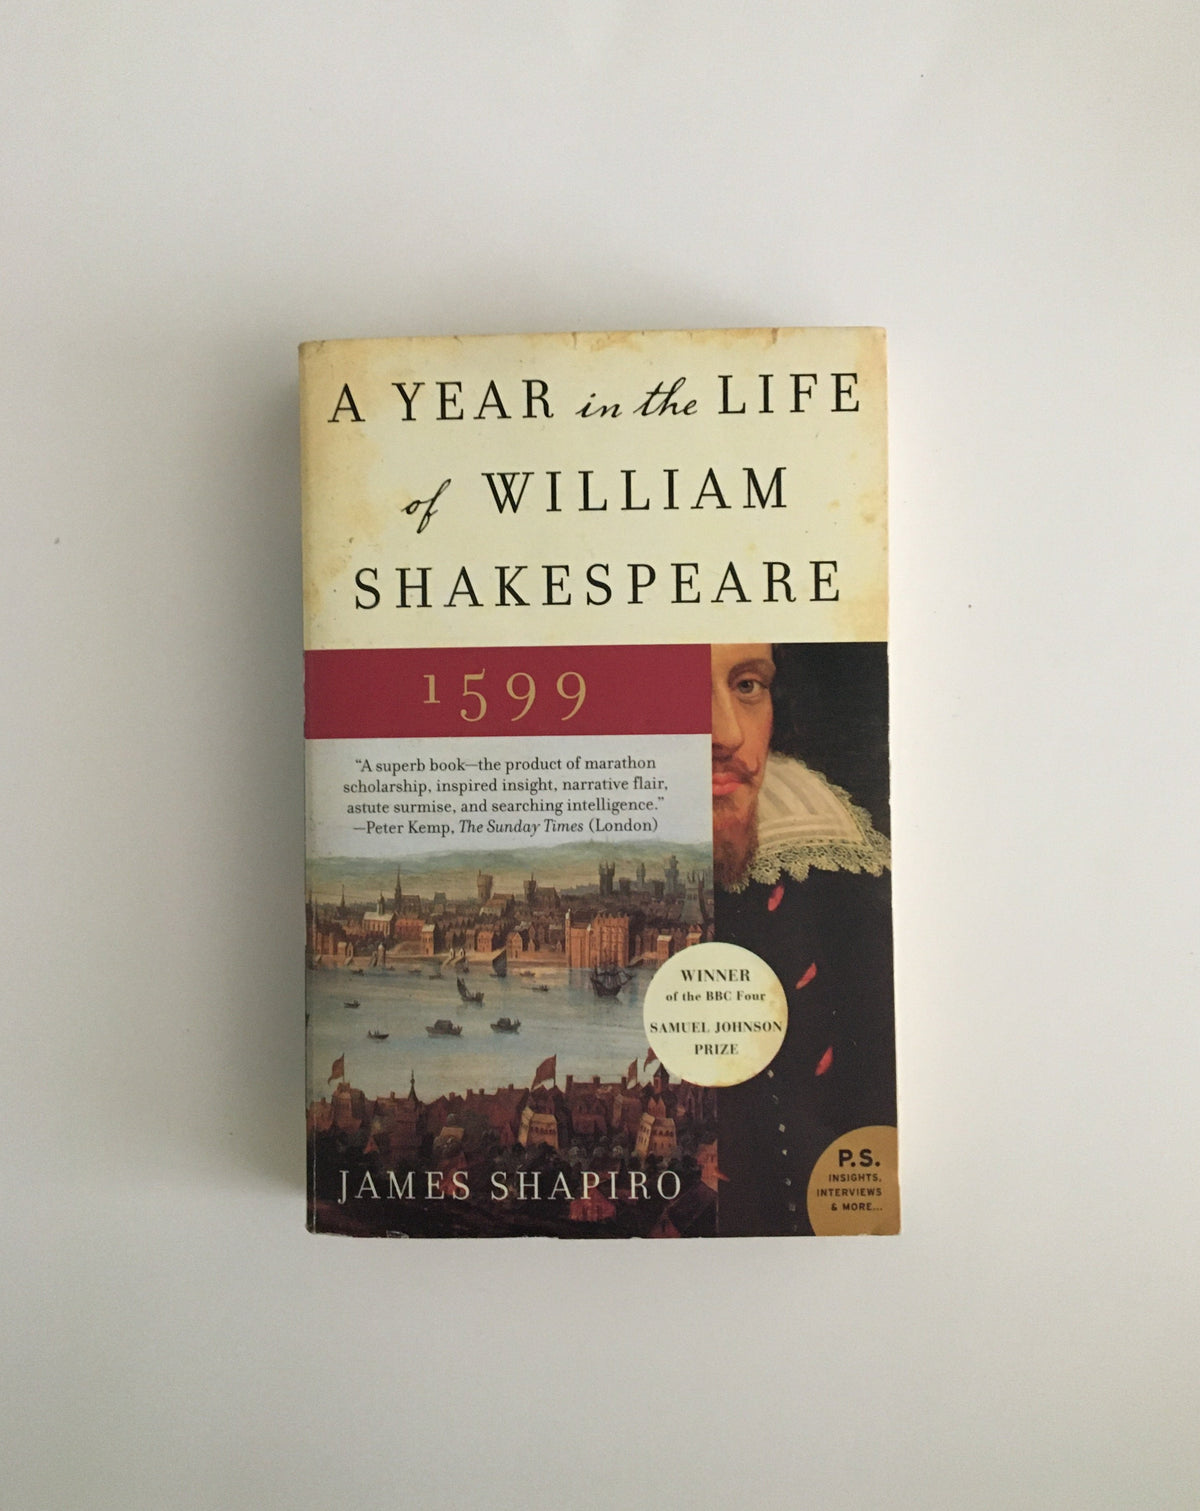 A Year in the Life of Shakespeare by James Shapiro